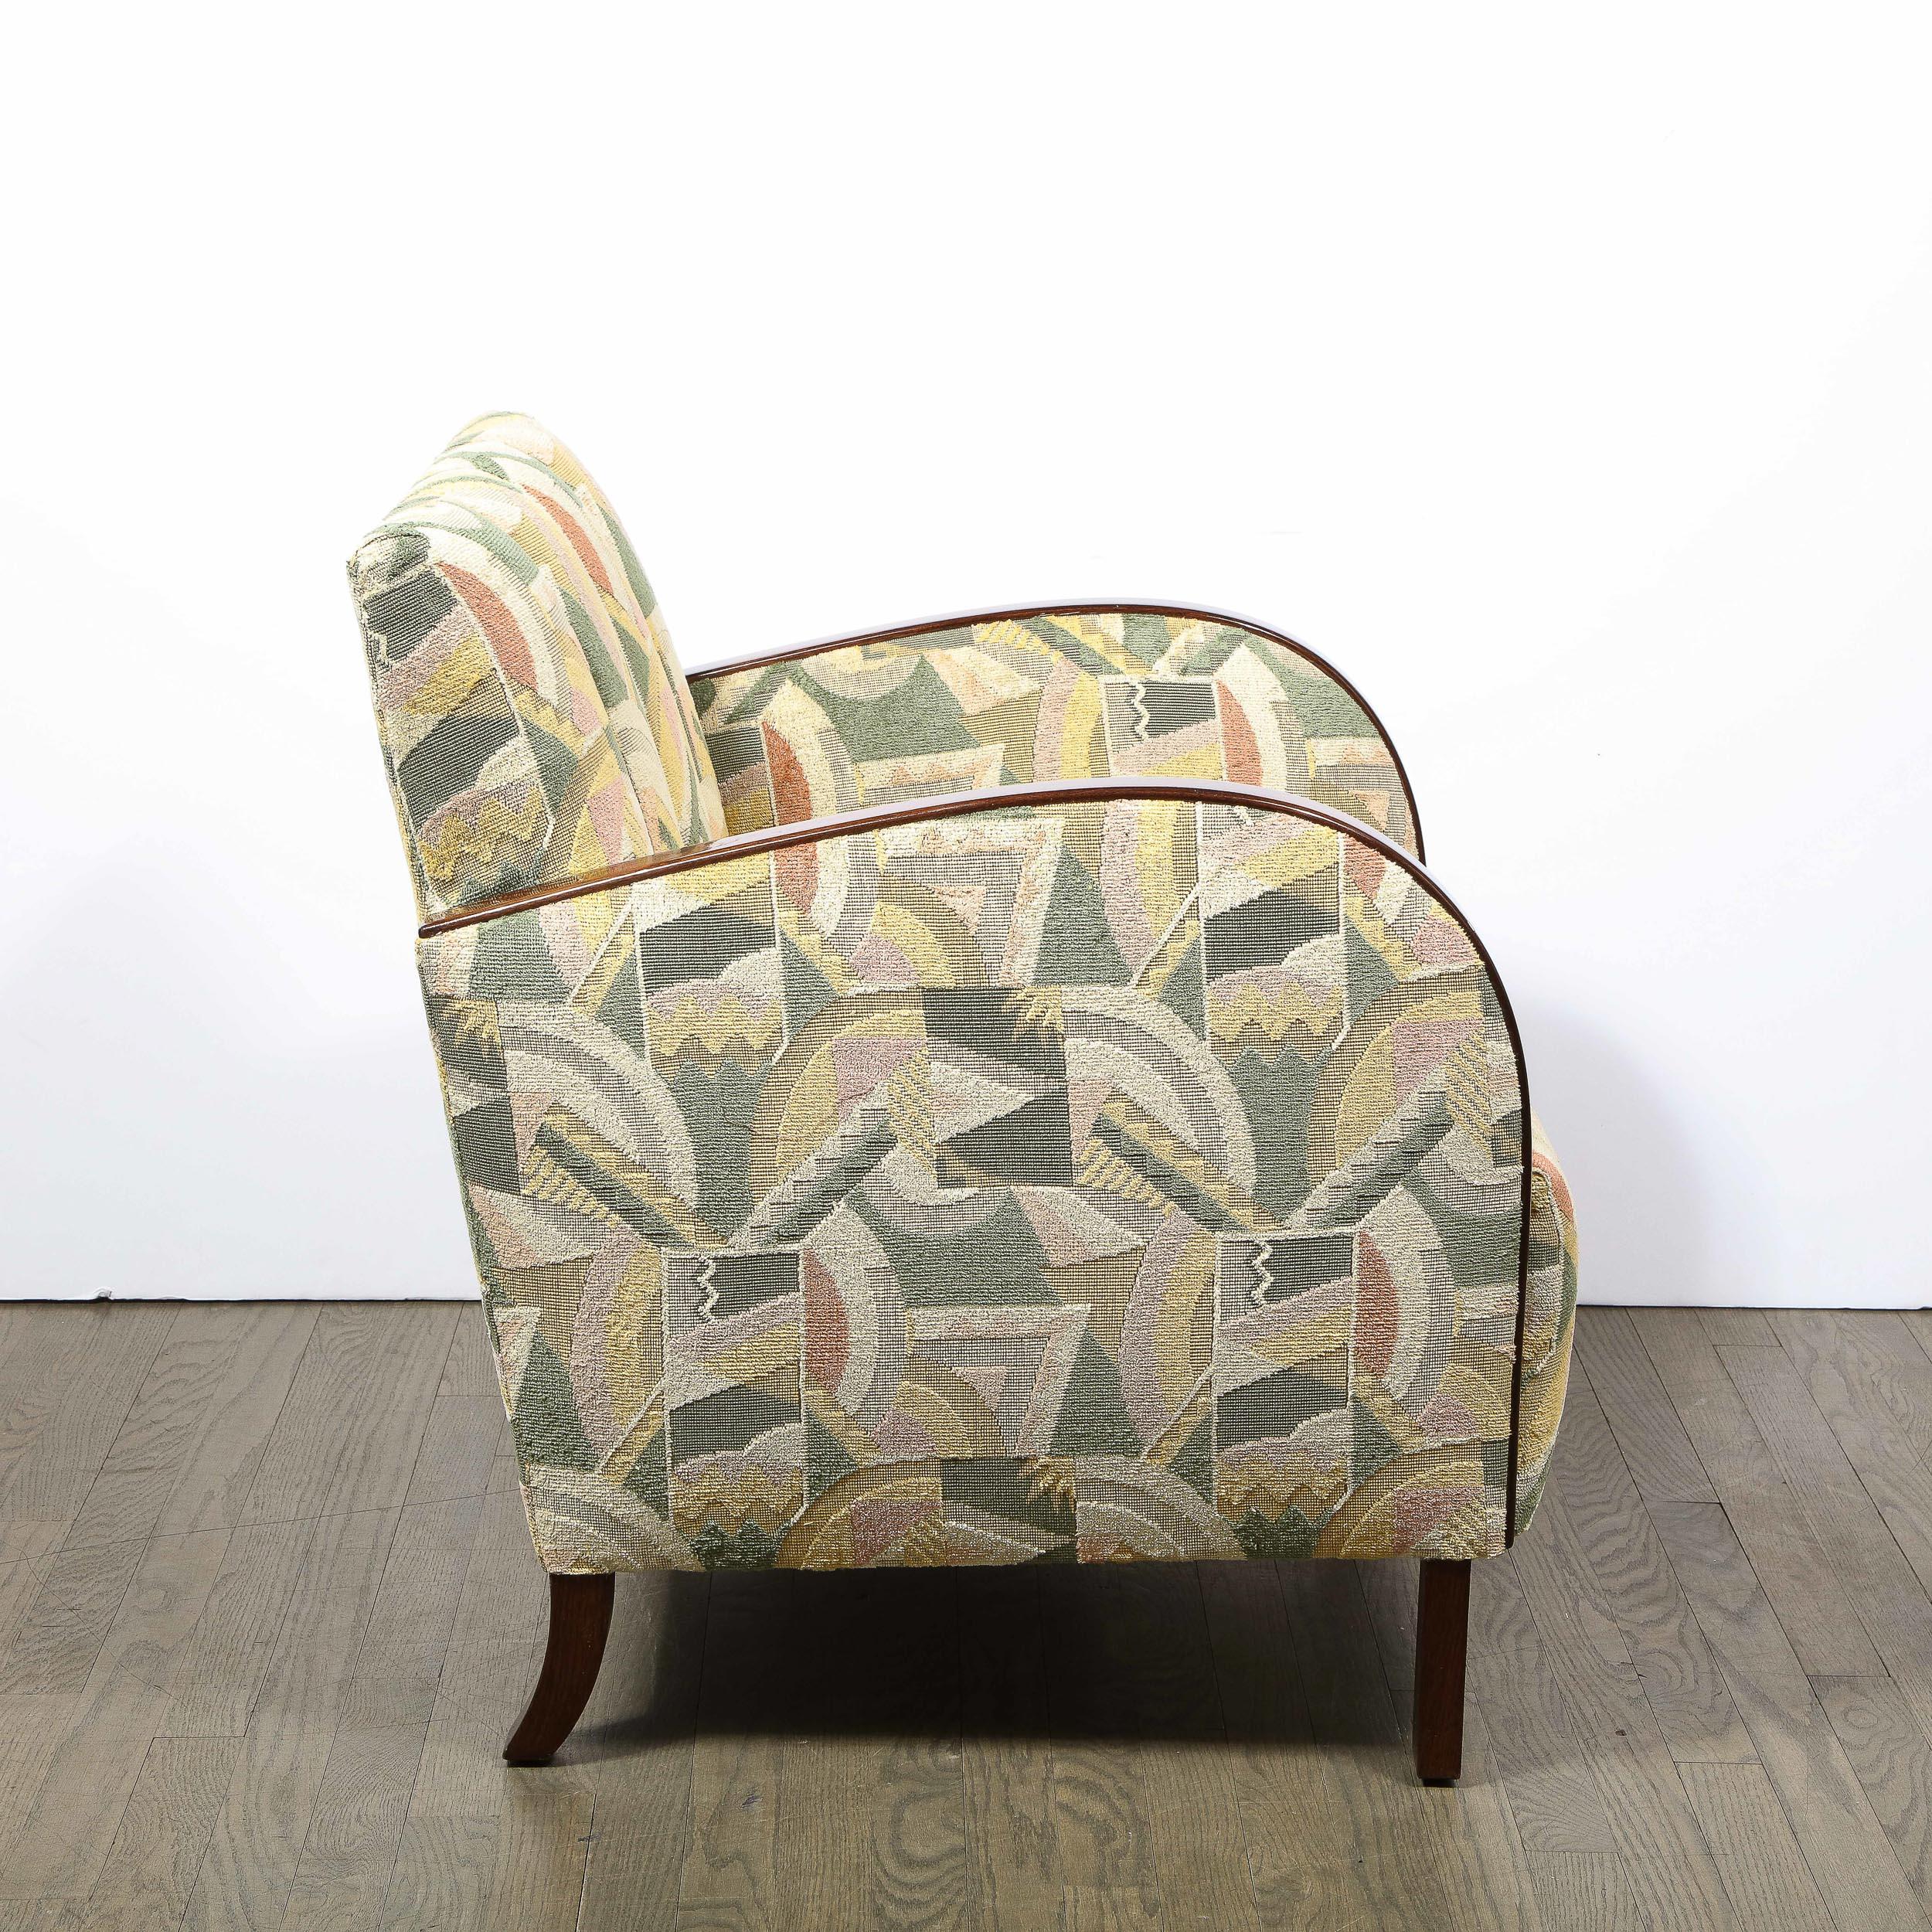 Pair of Art Deco Streamlined Walnut Club Chairs in Cubist Clarence House Fabric For Sale 5